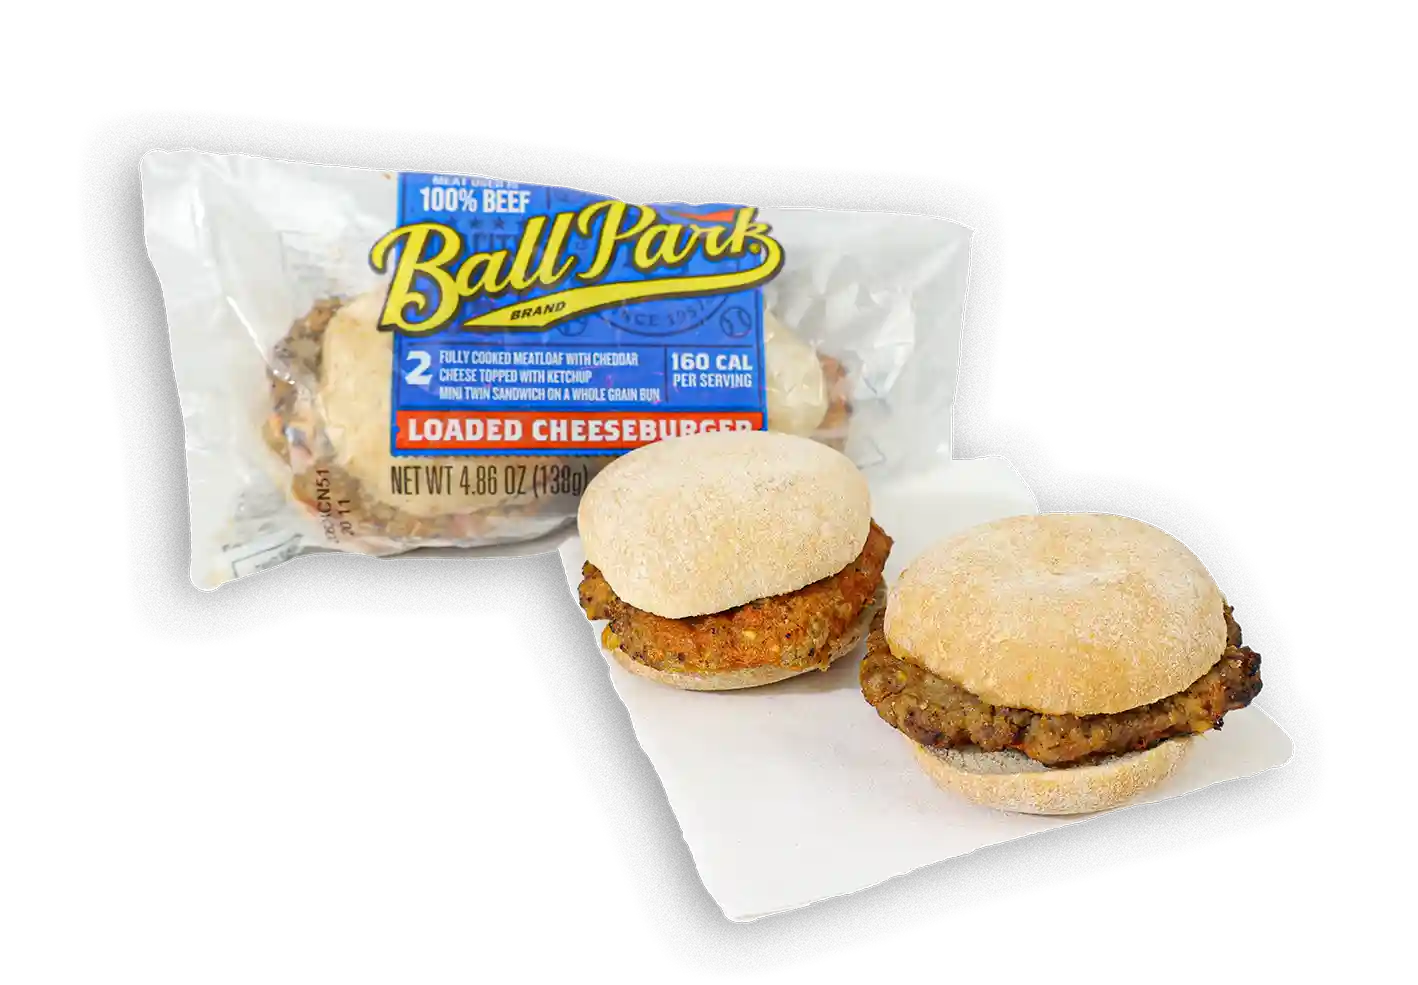 Ball Park® Individually Wrapped Loaded Cheeseburger Mini Twin Sandwiches, 80/4.86 oz.https://images.salsify.com/image/upload/s--BiAmH1WY--/q_25/bacjvpqabsh1irrkenyg.webp